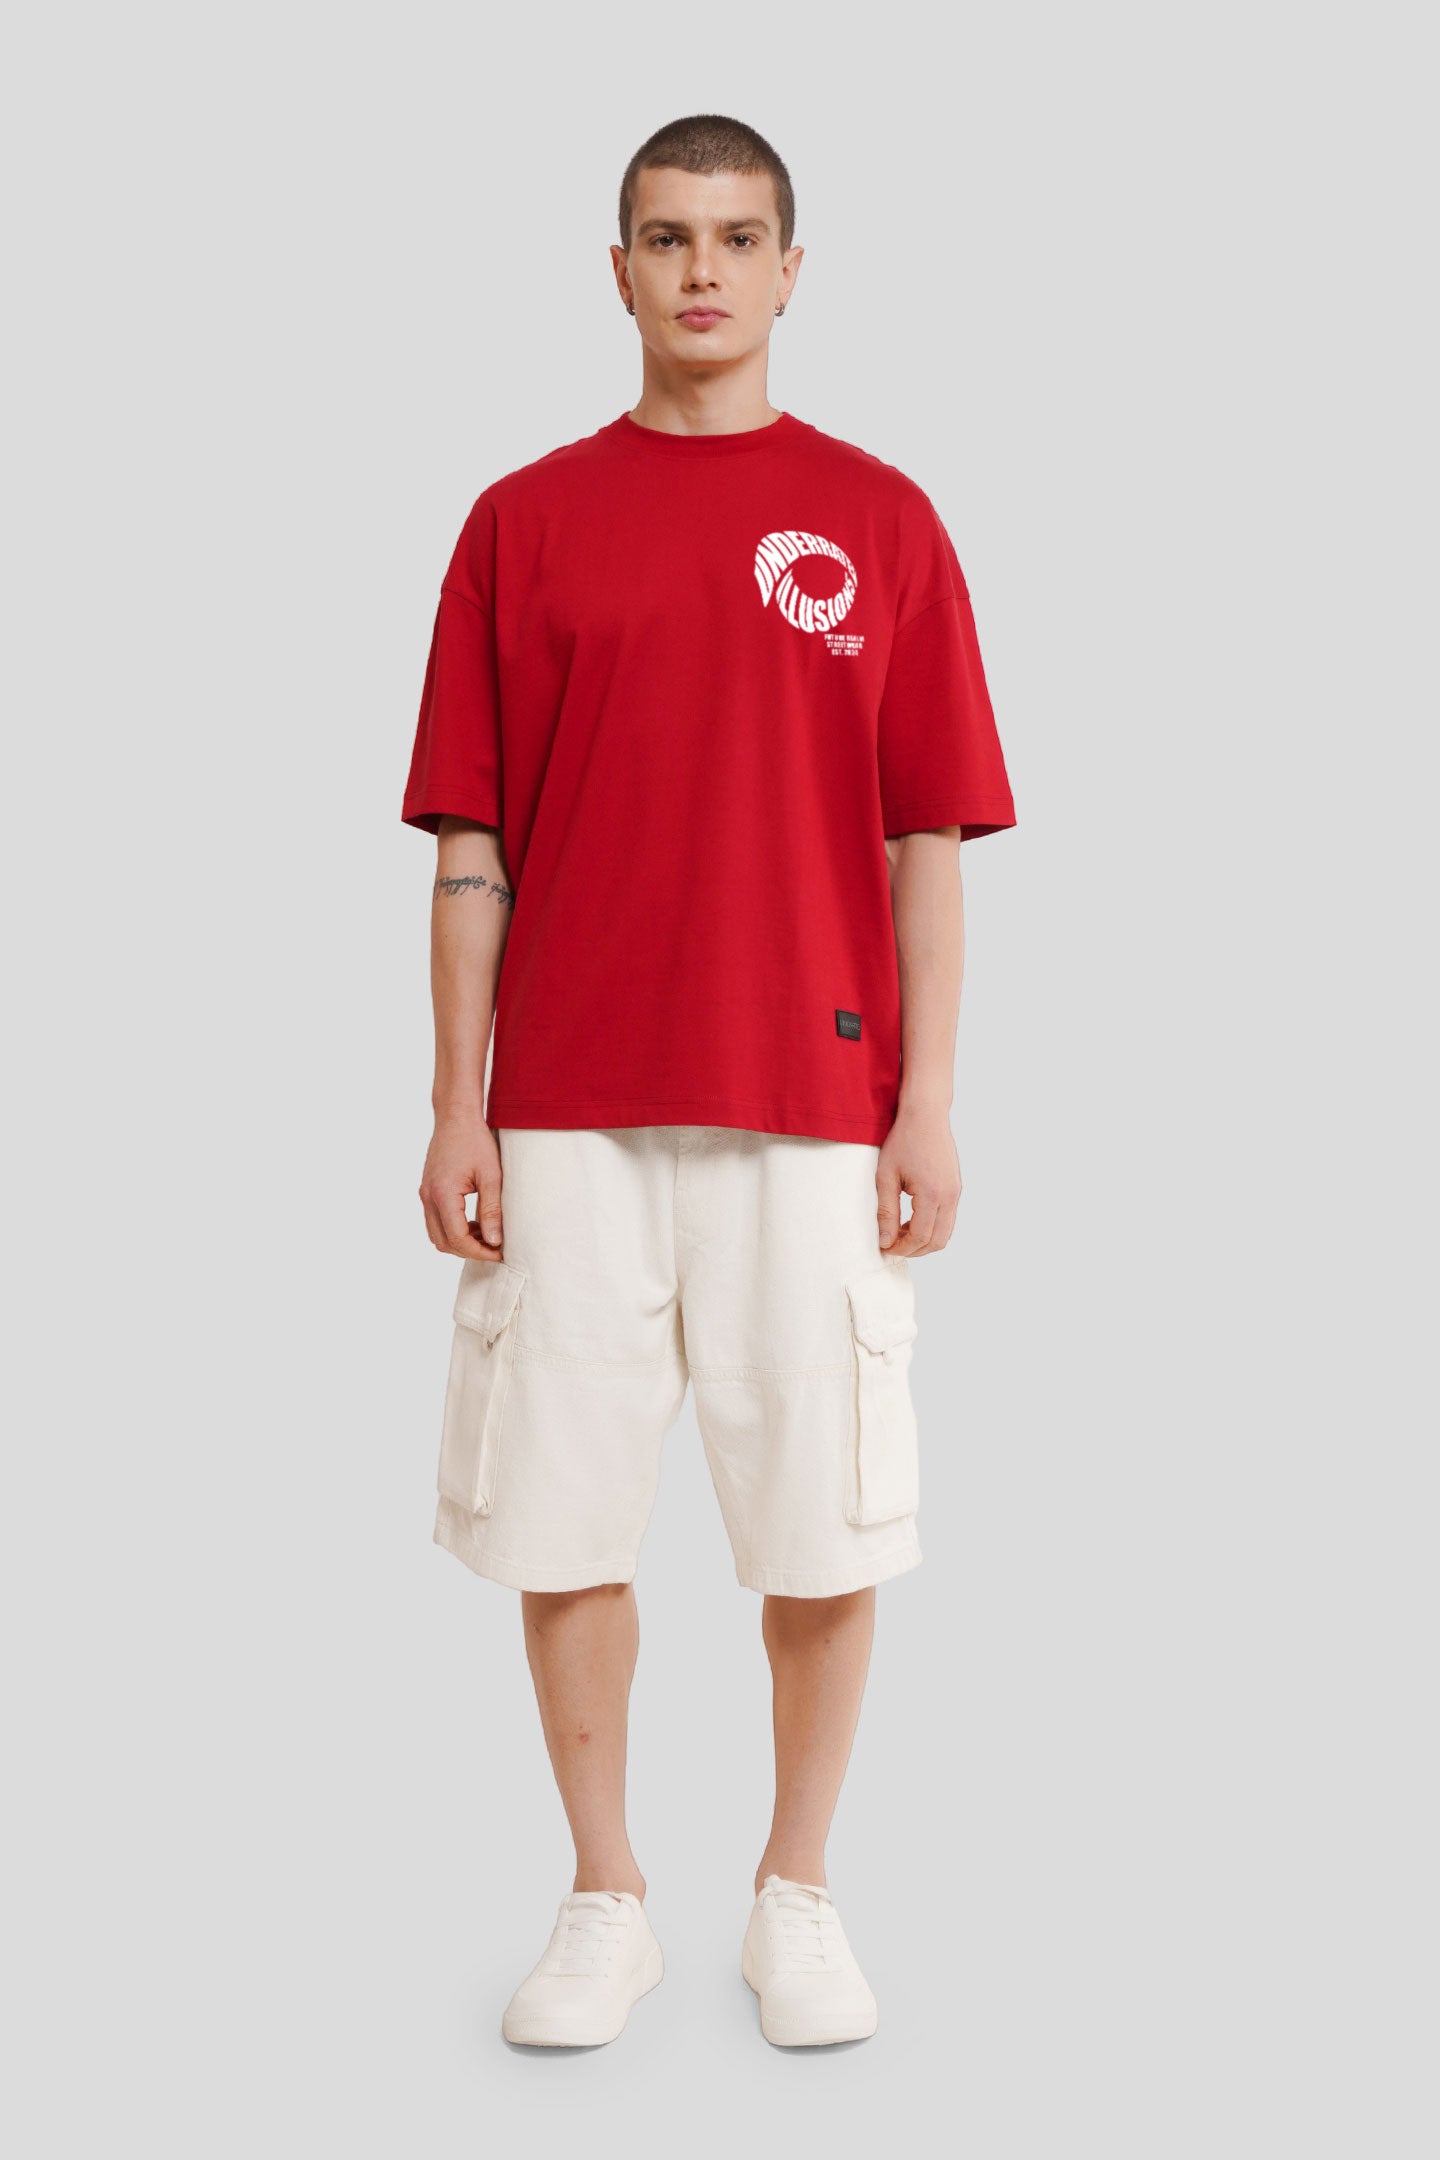 Underrated Illusions Red Printed T Shirt Men Baggy Fit With Front And Back Design Pic 4